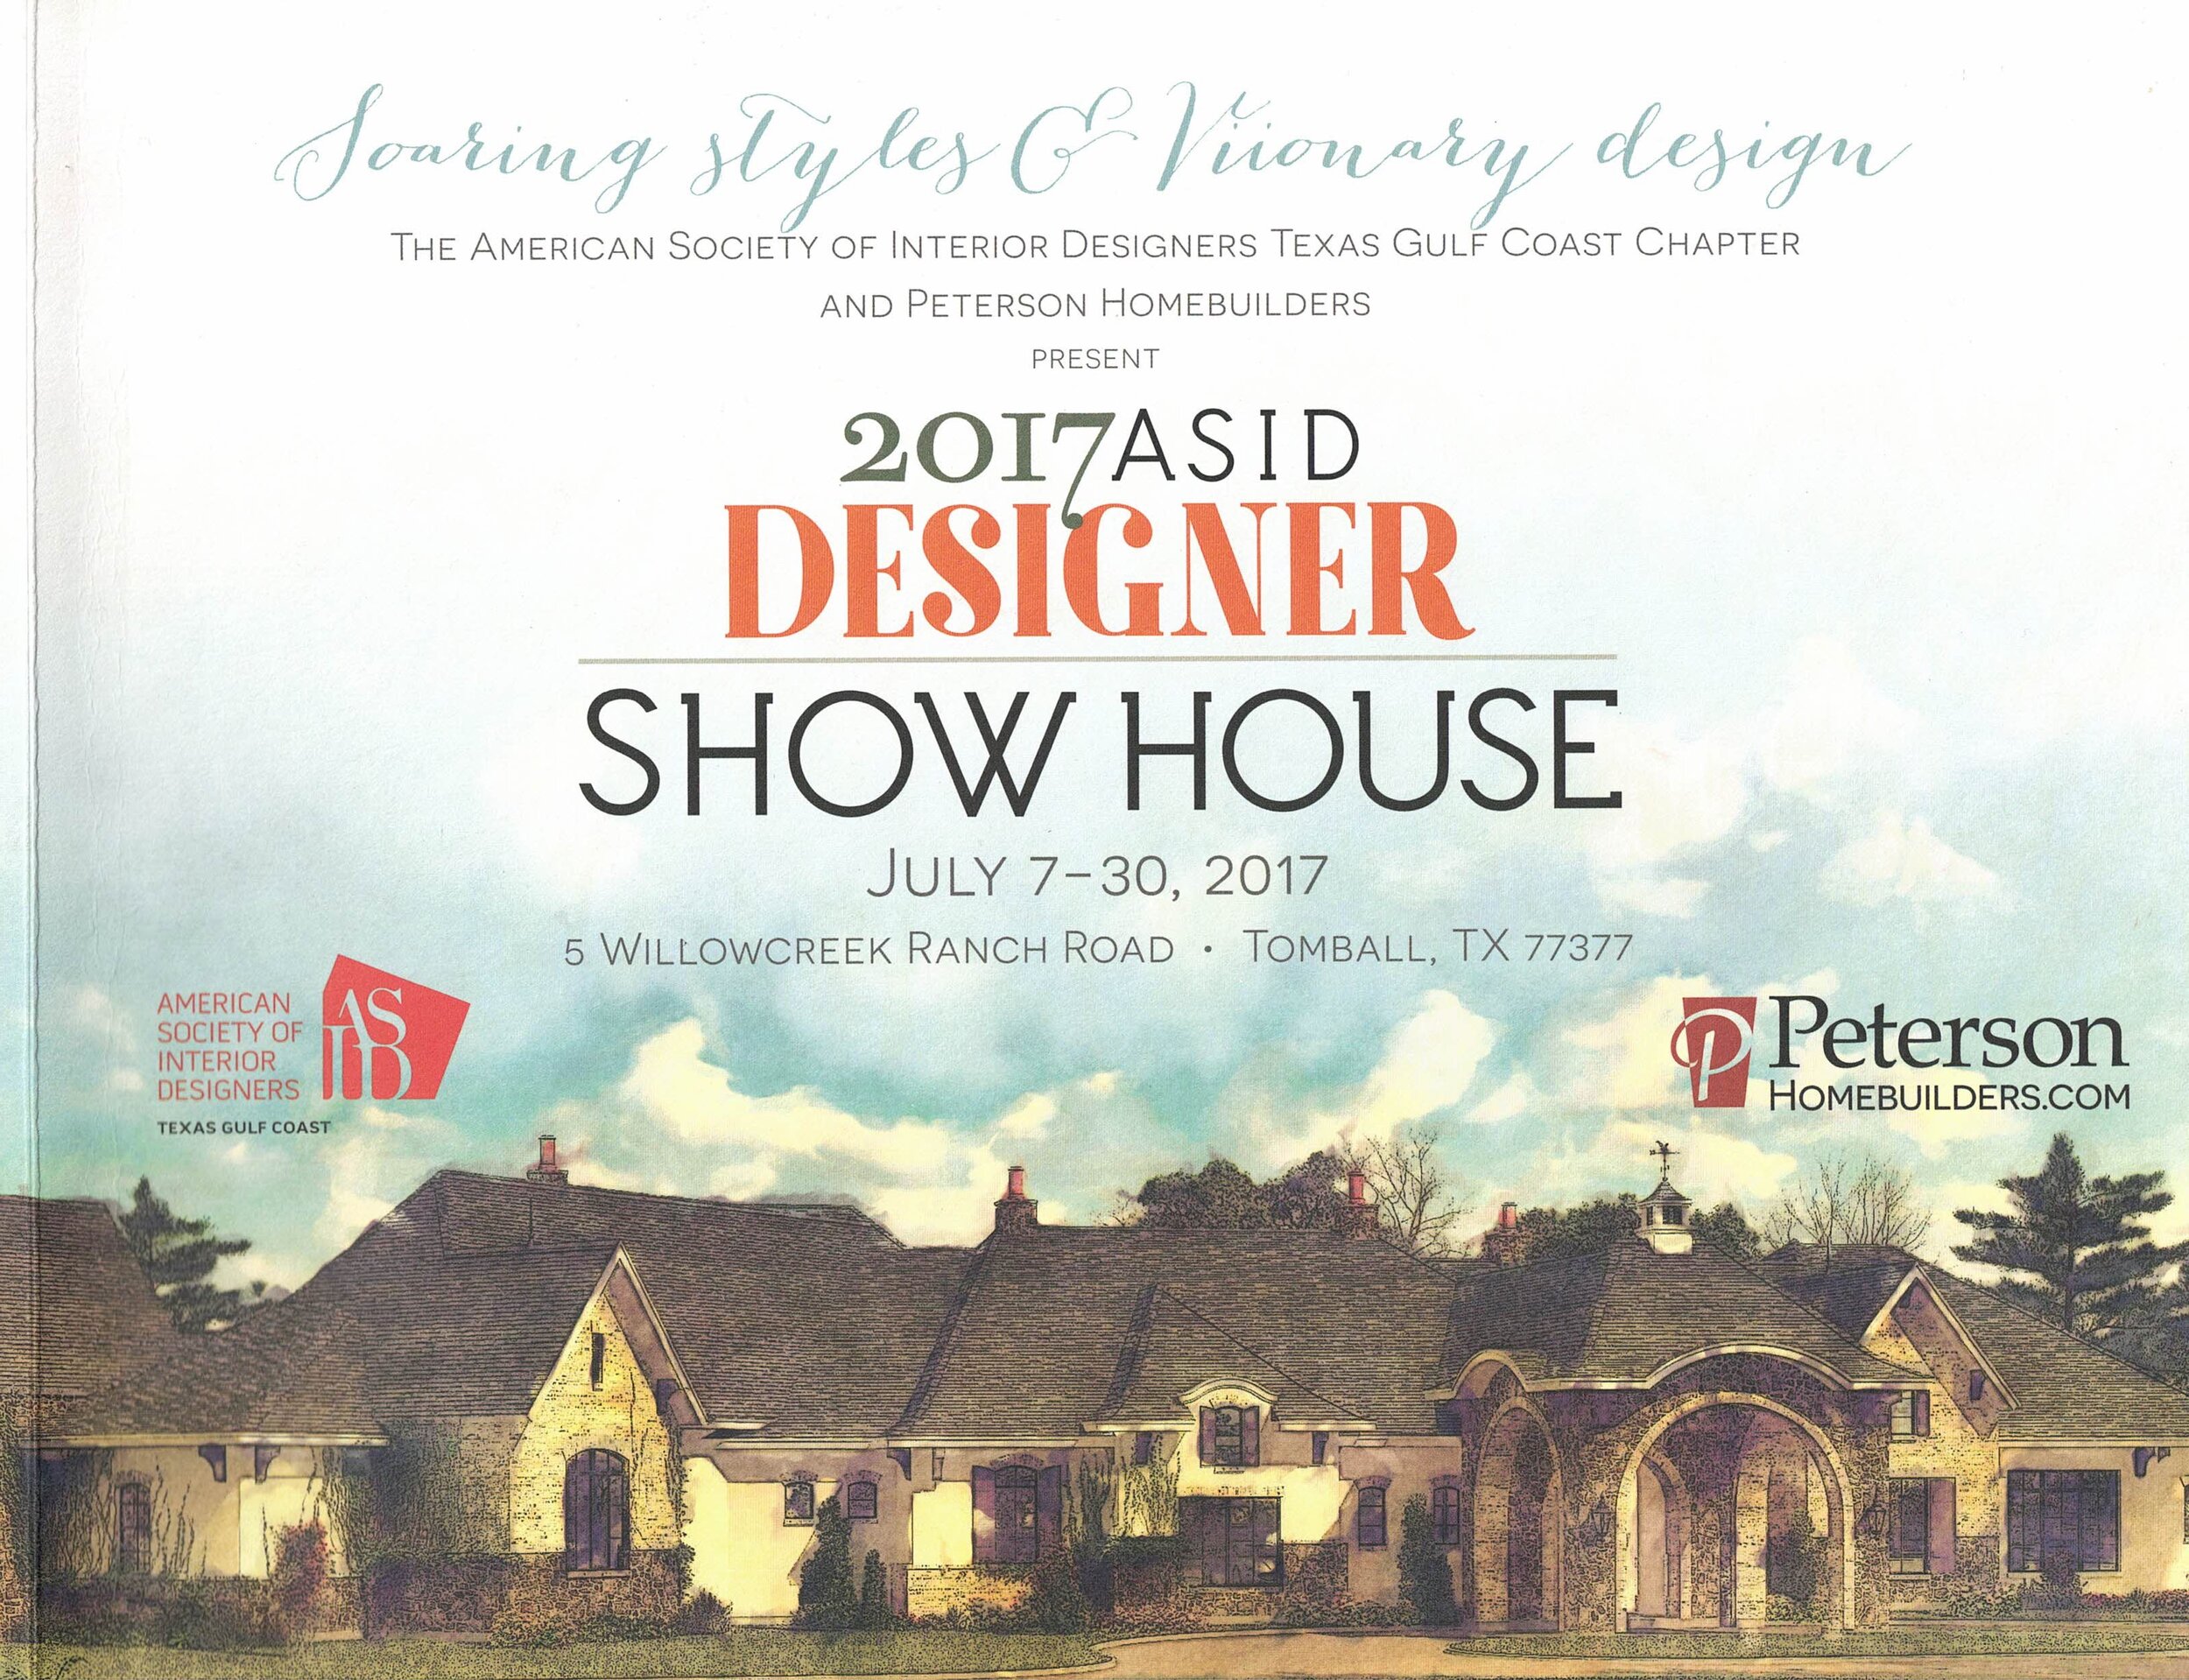 ASID 2017 Designer Show House at Willowcreek Ranch cover.jpg